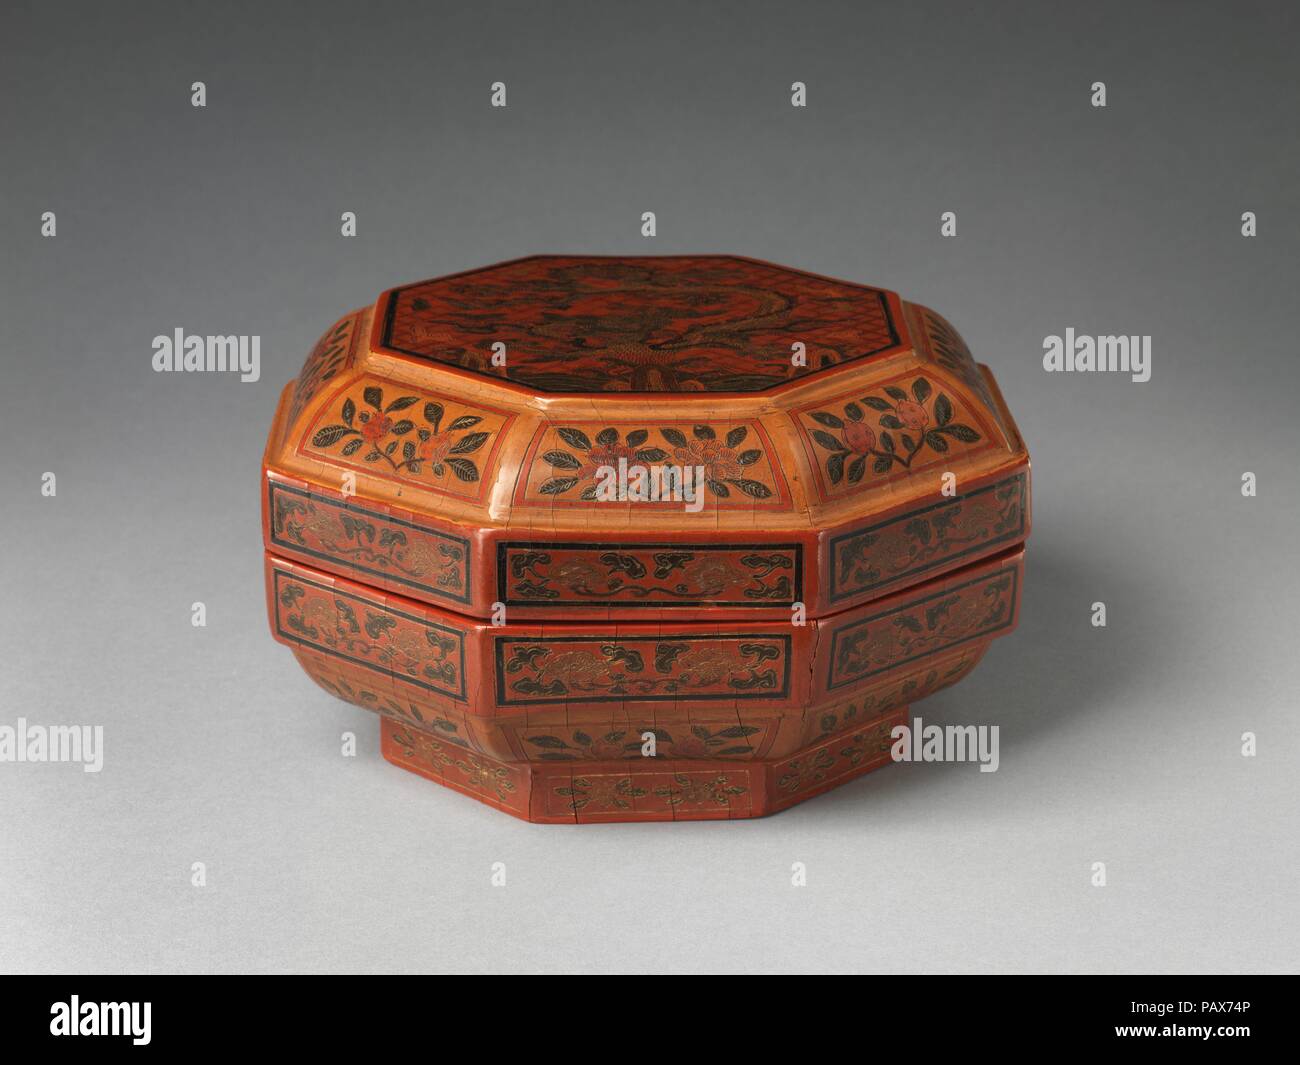 Octagonal box with 'dragon pine'. Culture: China. Dimensions: H. 4 3/4 in. (12.1 cm); Diam. 8 3/4 in.(22.2 cm). Date: dated 1595.  The designer of this box transformed the pine tree, an emblem of longevity, into a fanciful dragon, the symbol of the emperor. This combination was probably used to subtly express a wish that the emperor would live as long as the pine tree. Museum: Metropolitan Museum of Art, New York, USA. Stock Photo